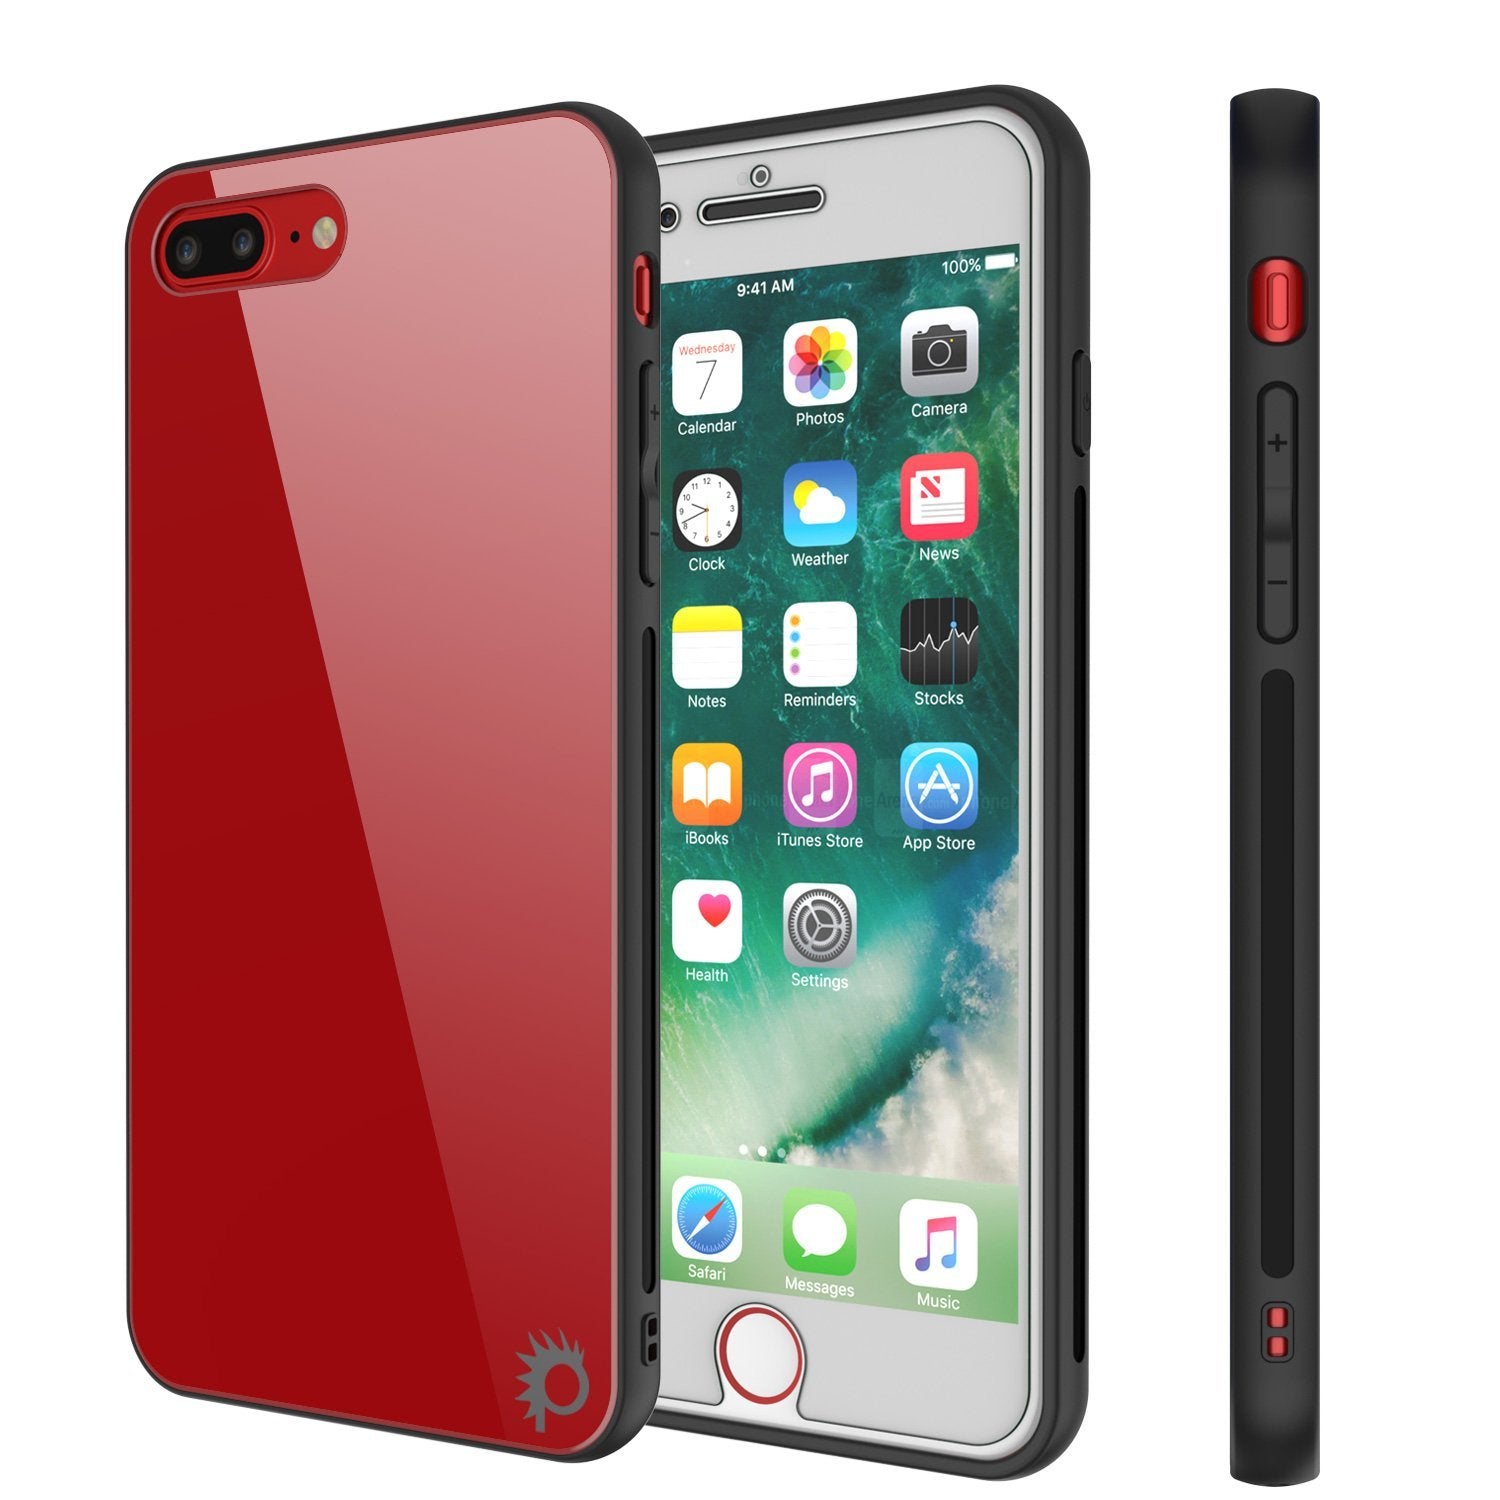 iPhone 8 PLUS Case, Punkcase GlassShield Ultra Thin Protective 9H Full Body Tempered Glass Cover W/ Drop Protection & Non Slip Grip for Apple iPhone 7 PLUS / Apple iPhone 8 PLUS (Red) - PunkCase NZ